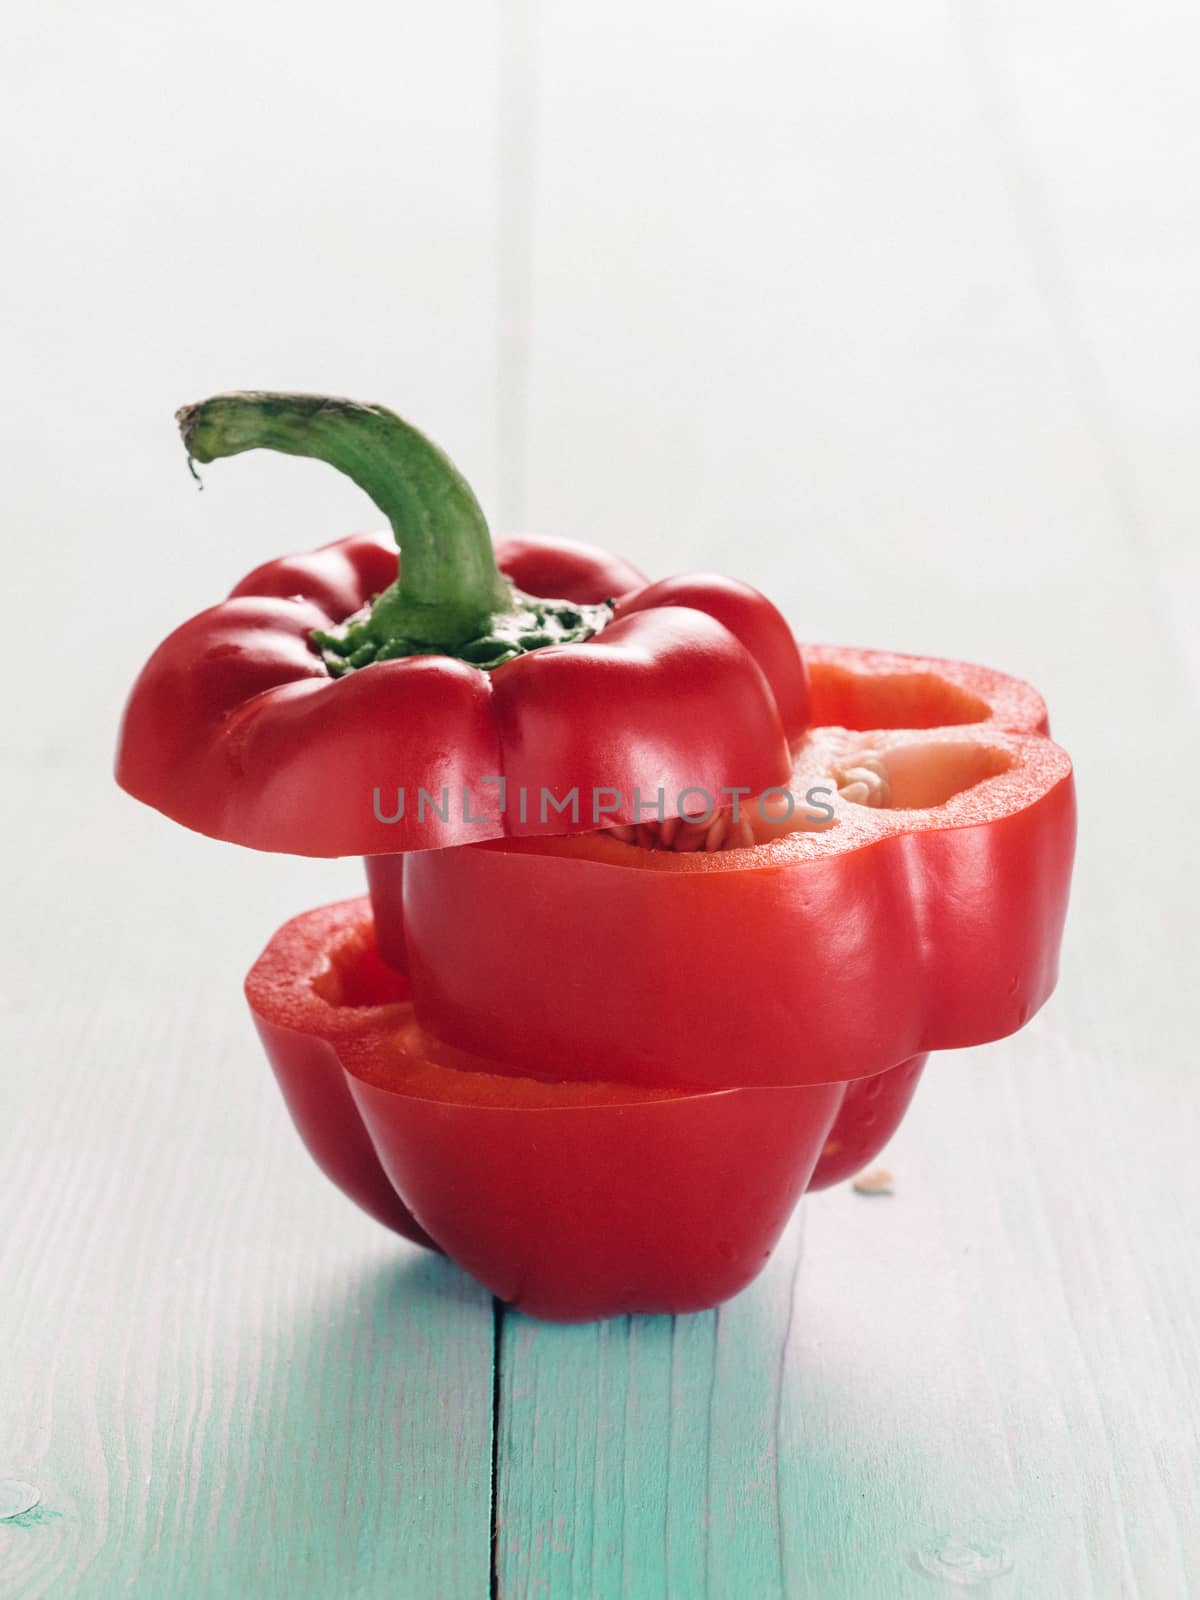 Sweet red peppers sliced on blue wooden background by fascinadora